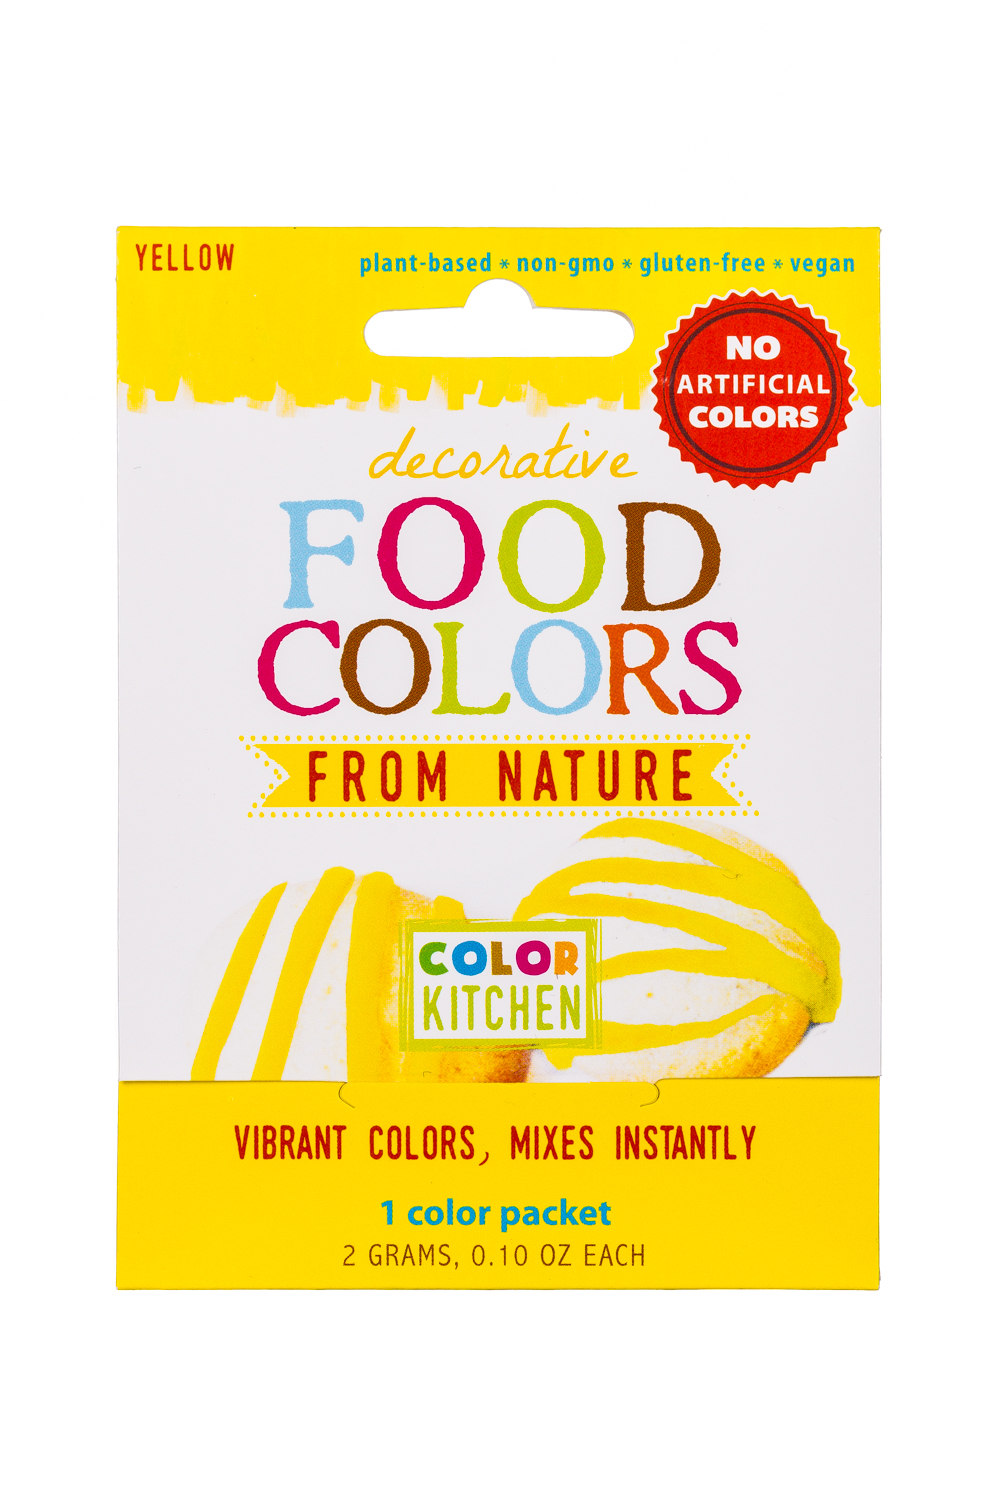 Plant-based Food Color, Natural, Artififcal dye-free